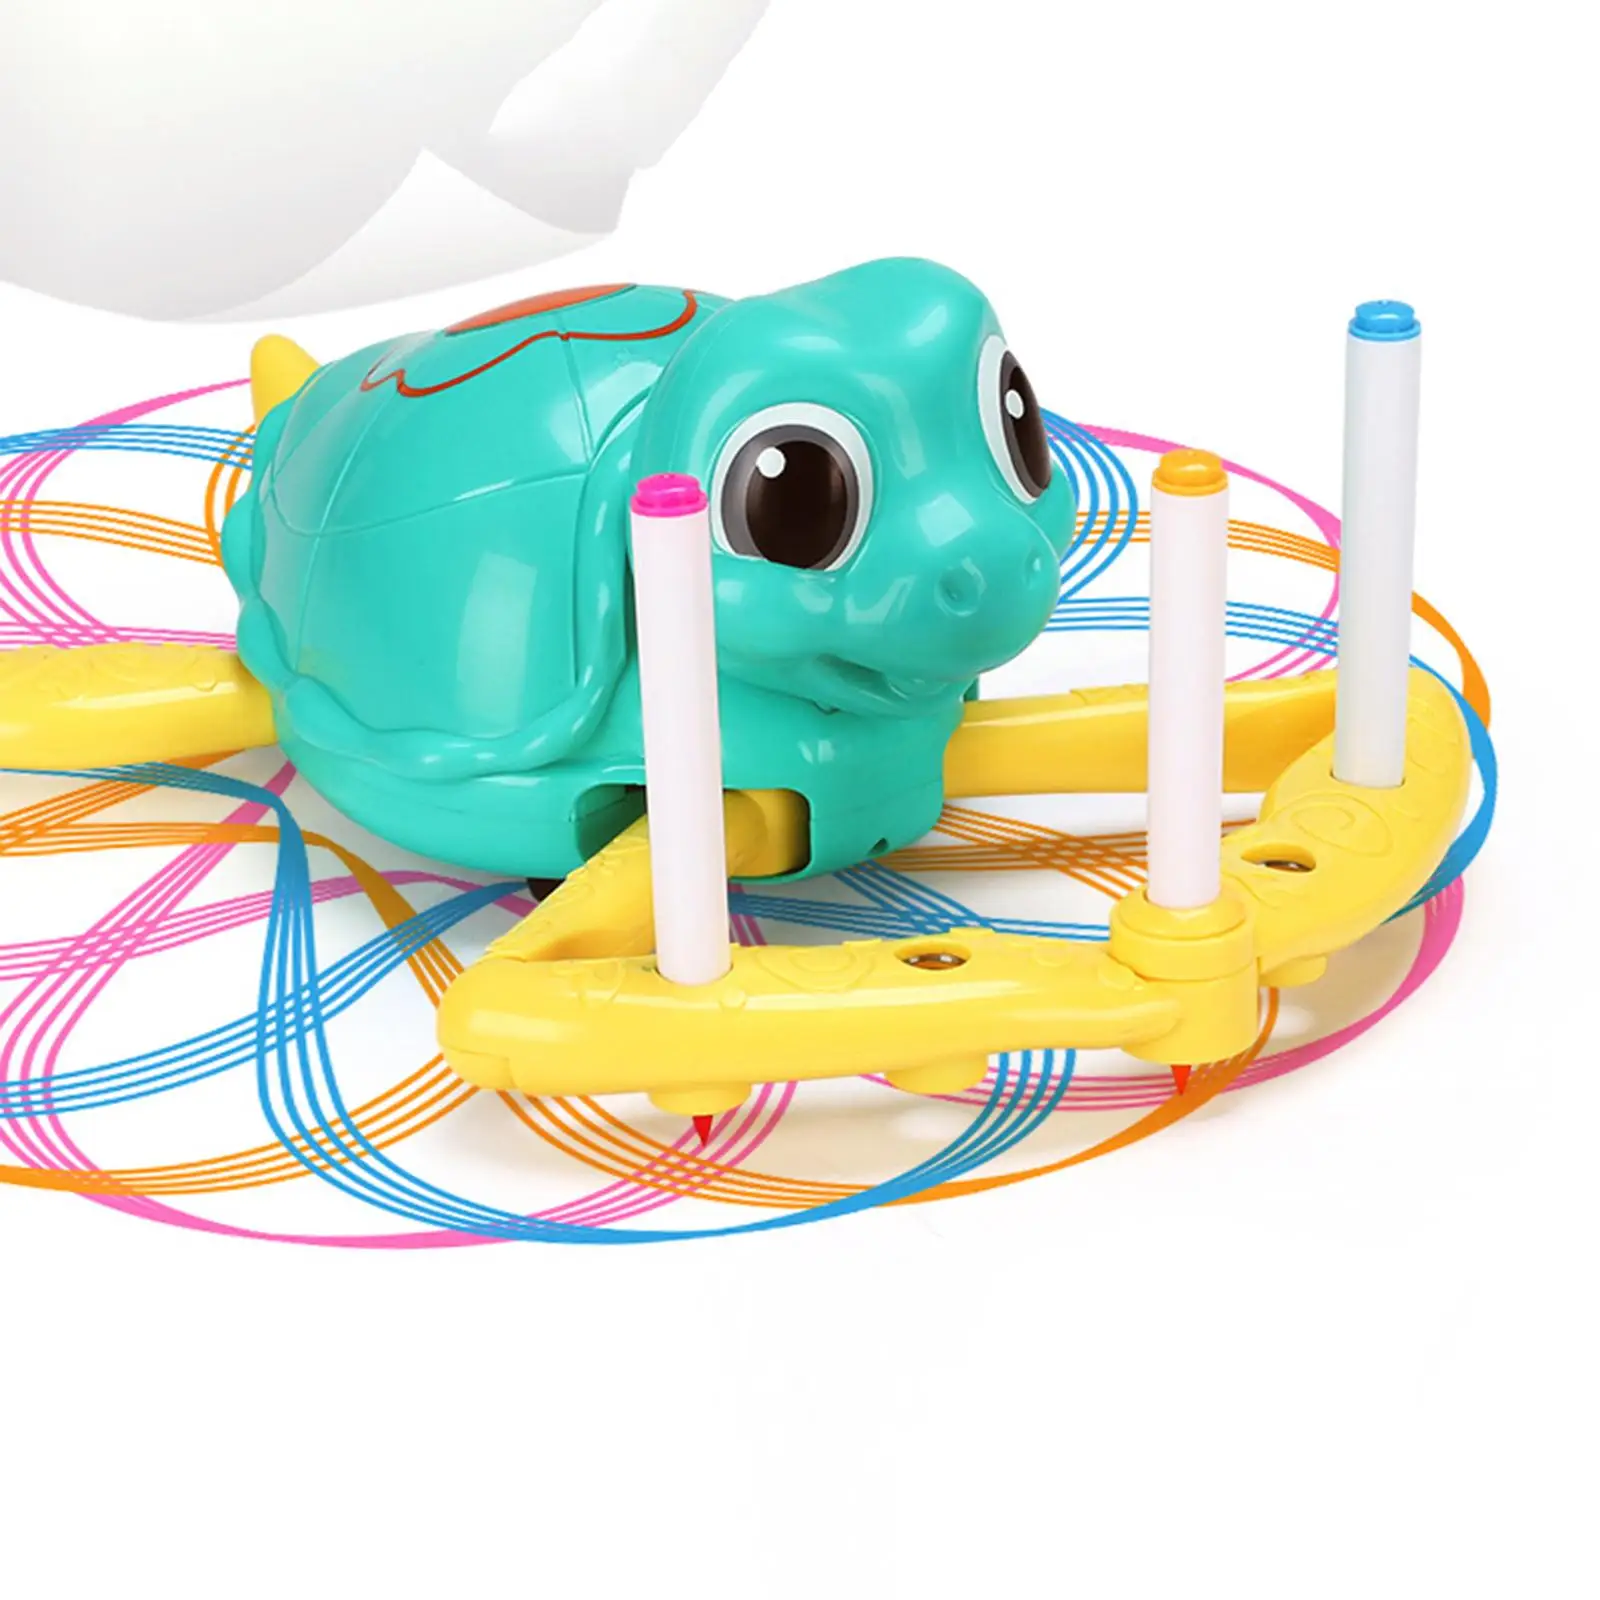 Cretive Turtle Pinting Toys Eductionl Toys Eductionl Drwing Plyset Children Pinting Bord for Toddlers Boys Girls Kids